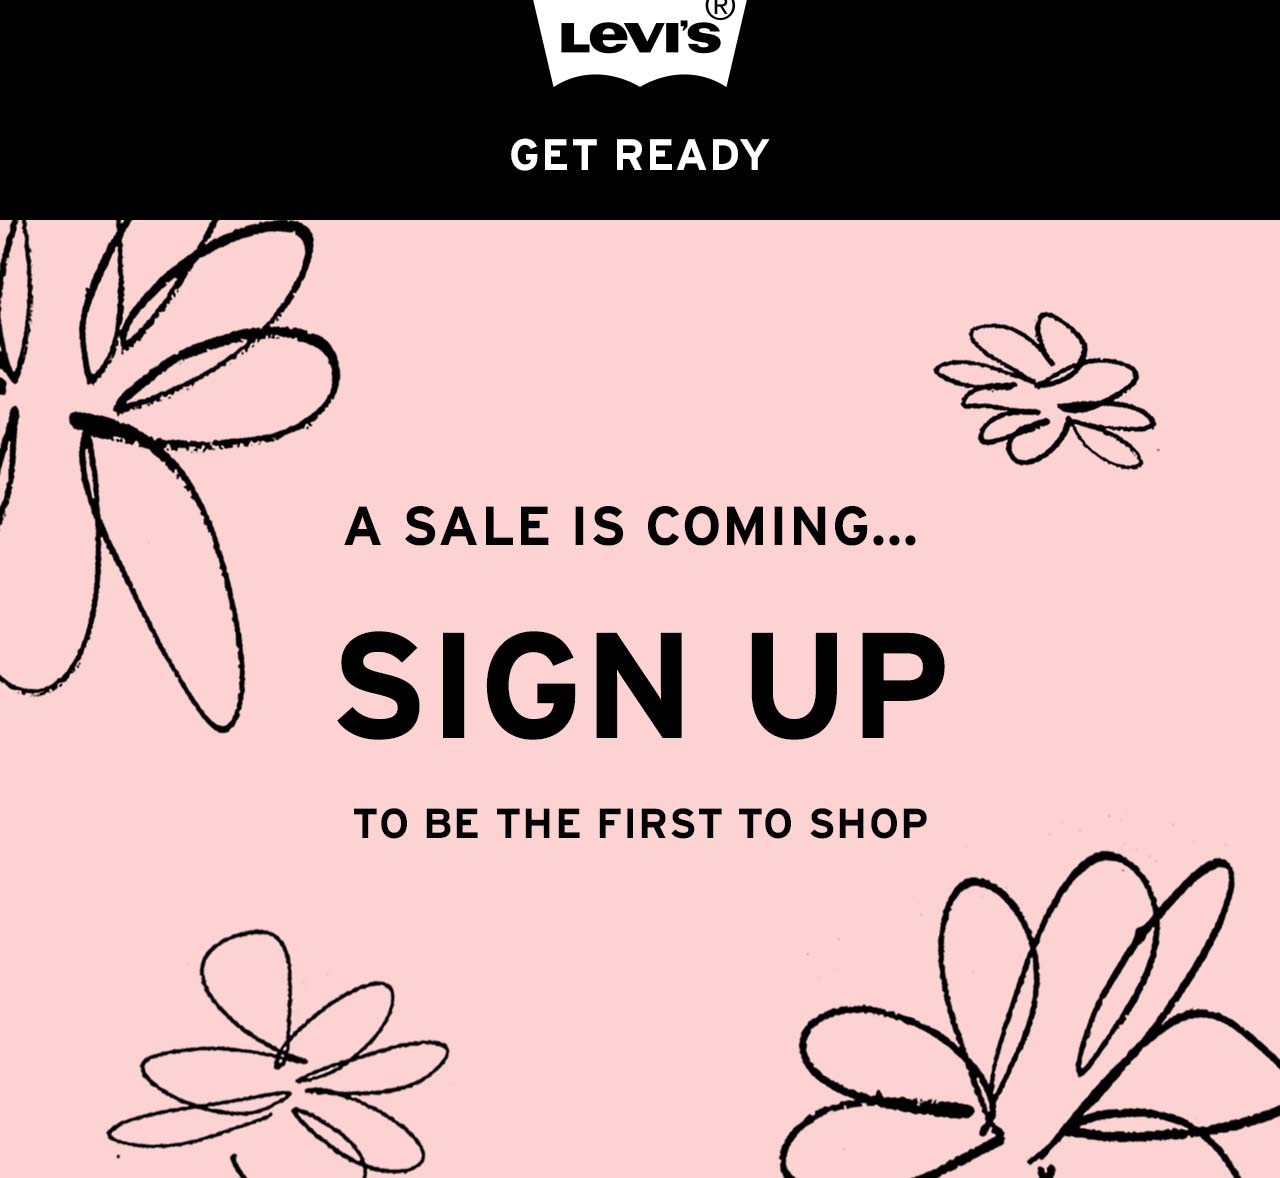 SIGN UP TO BE THE FIRST TO SHOP OUR NEXT SALE